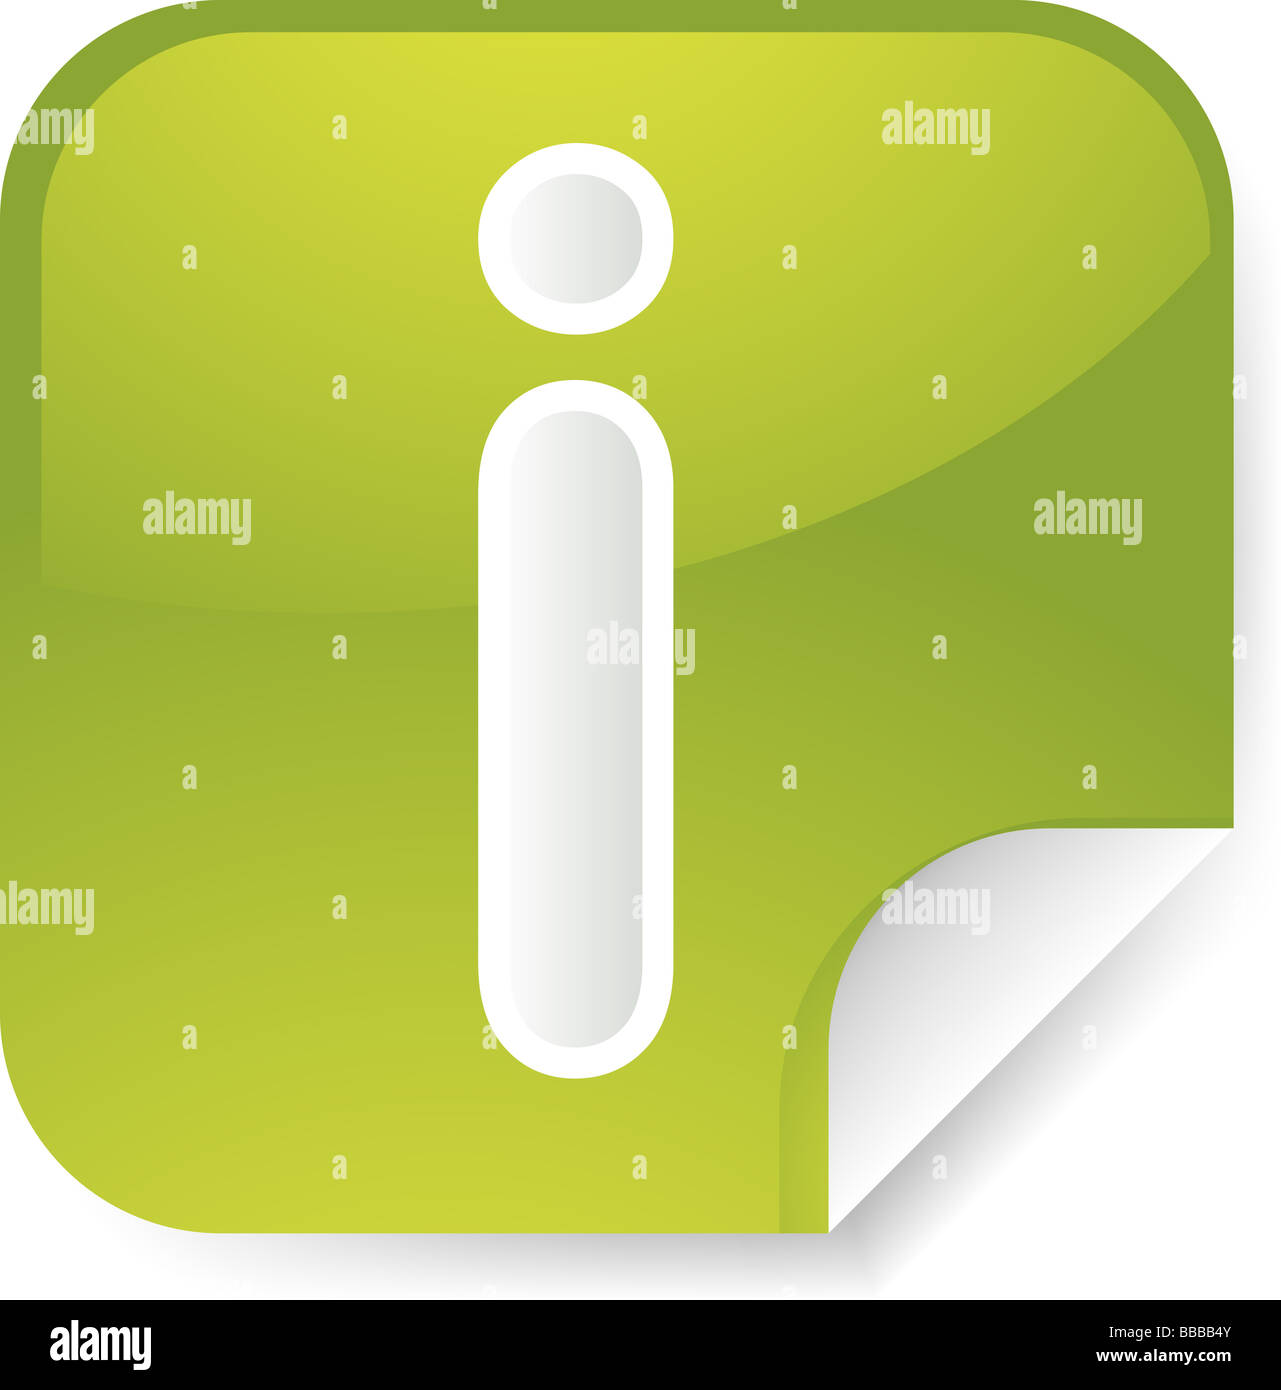 Navigation icon sticker button with information symbol Stock Photo